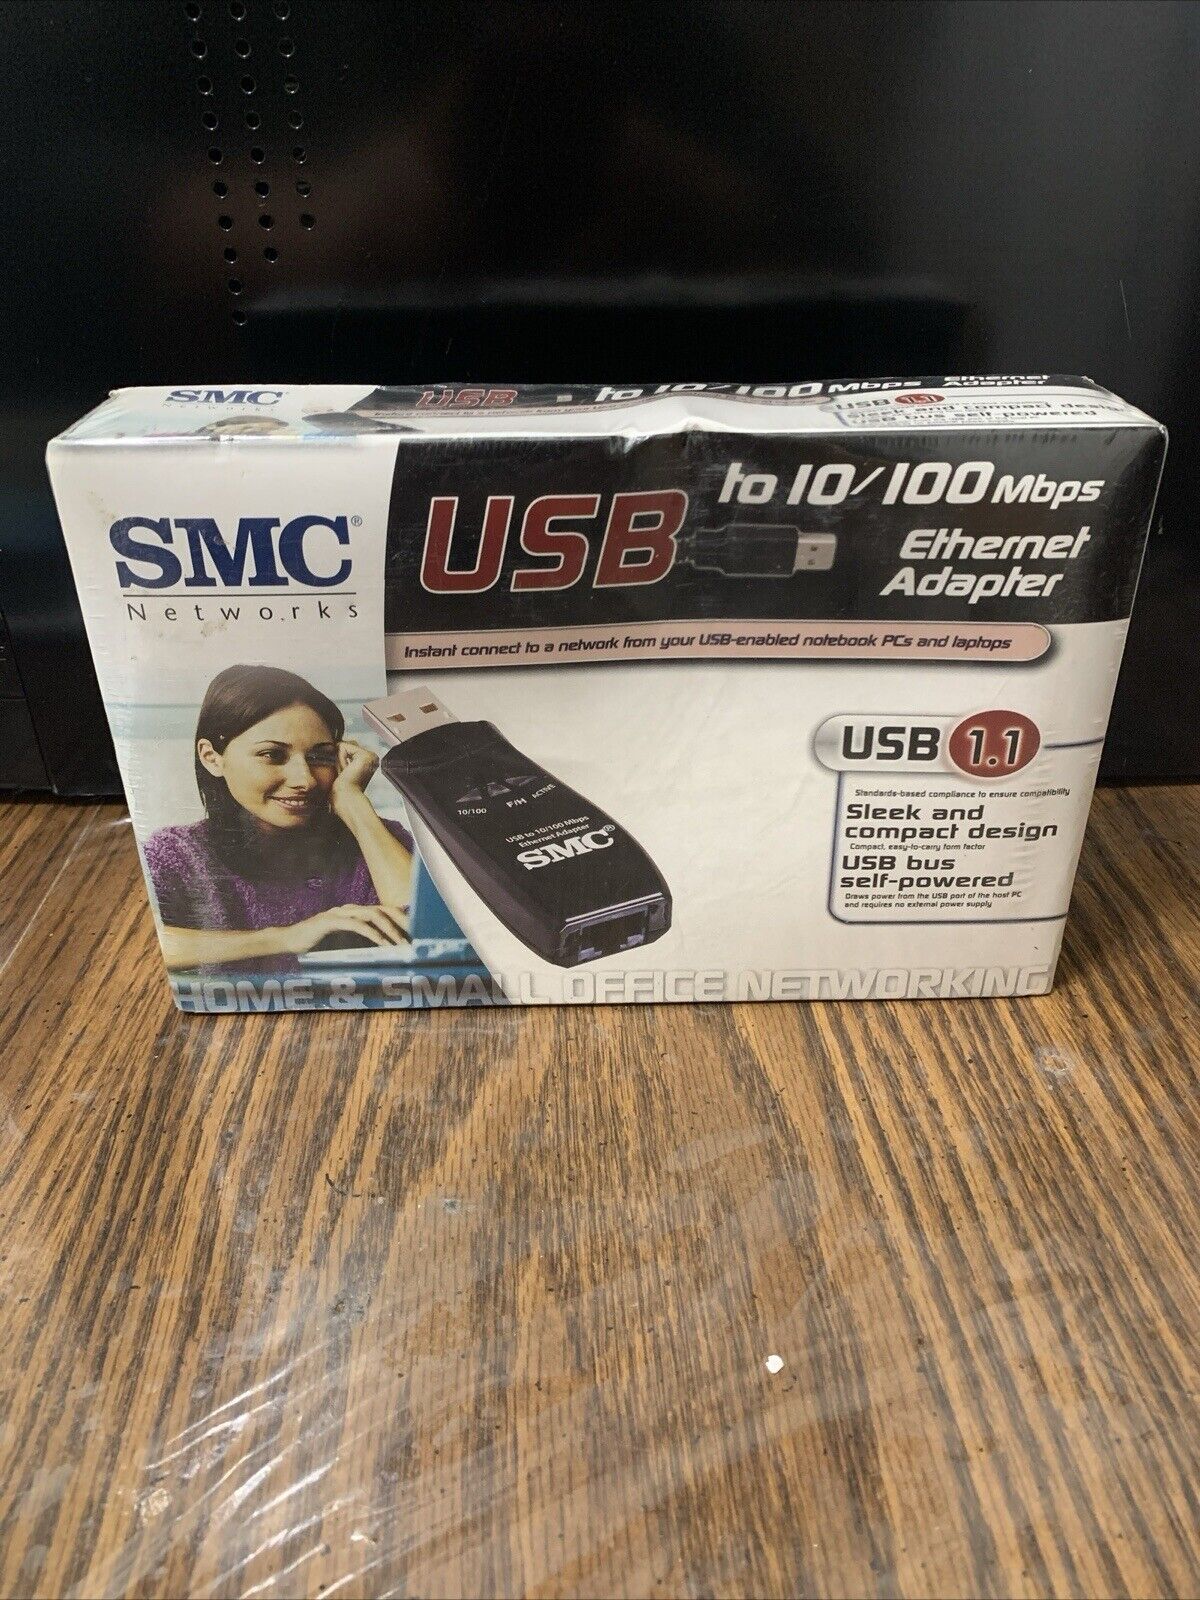 SMC Networks Compact USB 10/100Mbps Fast Ethernet Adapter